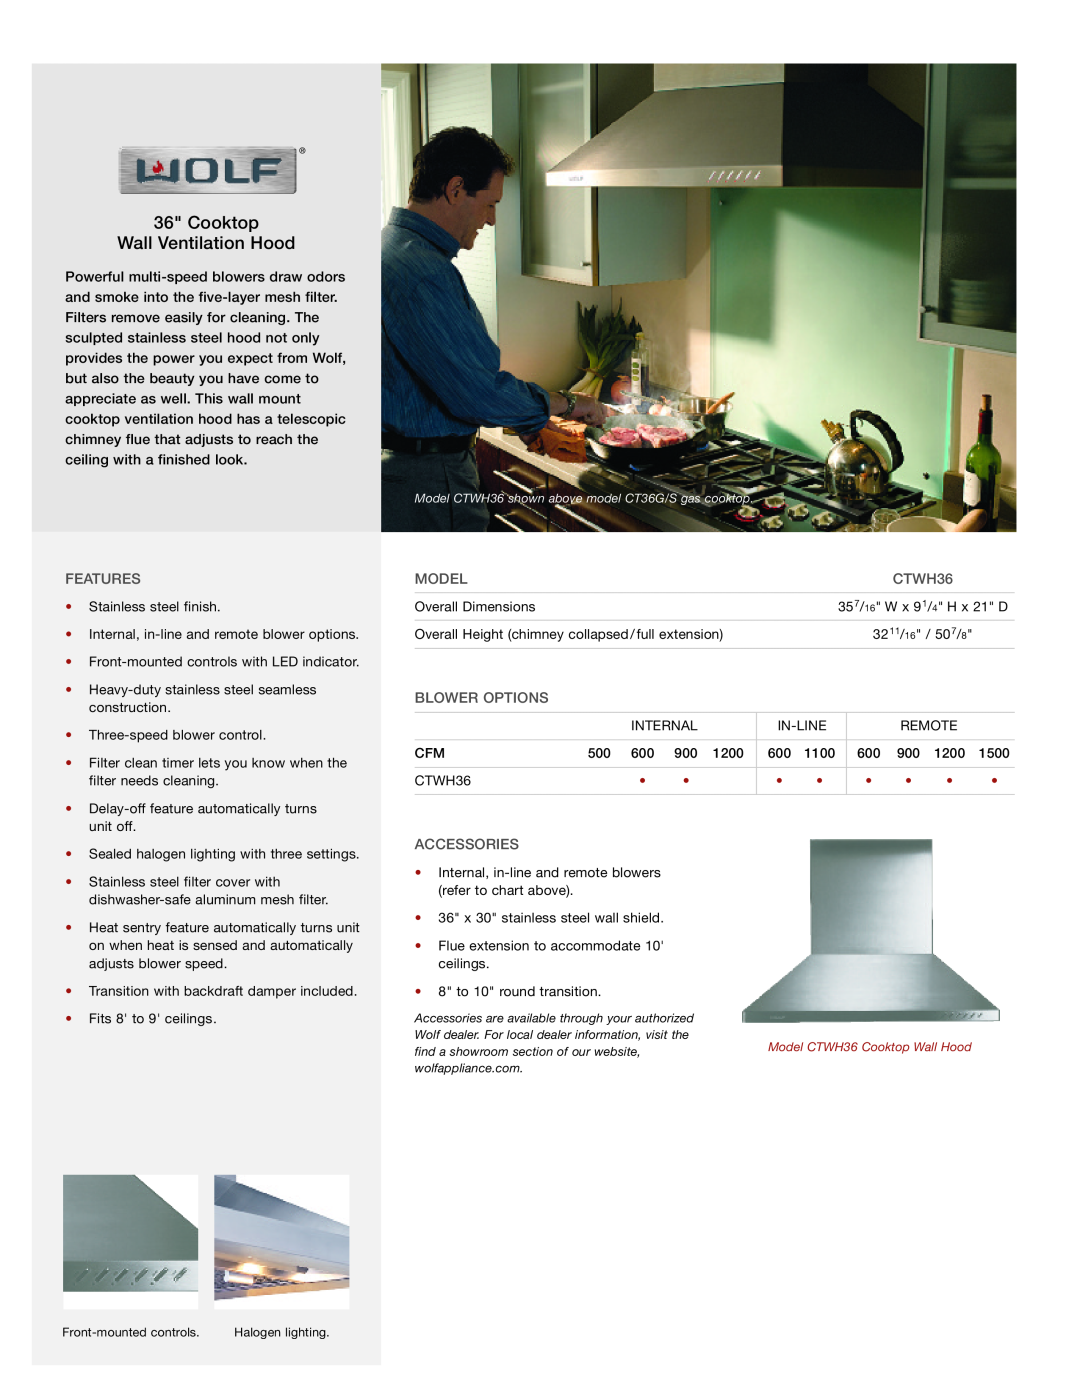 Wolf Appliance Company CTWH36 dimensions Cooktop Wall Ventilation Hood, Features, Model, Blower Options, Accessories 